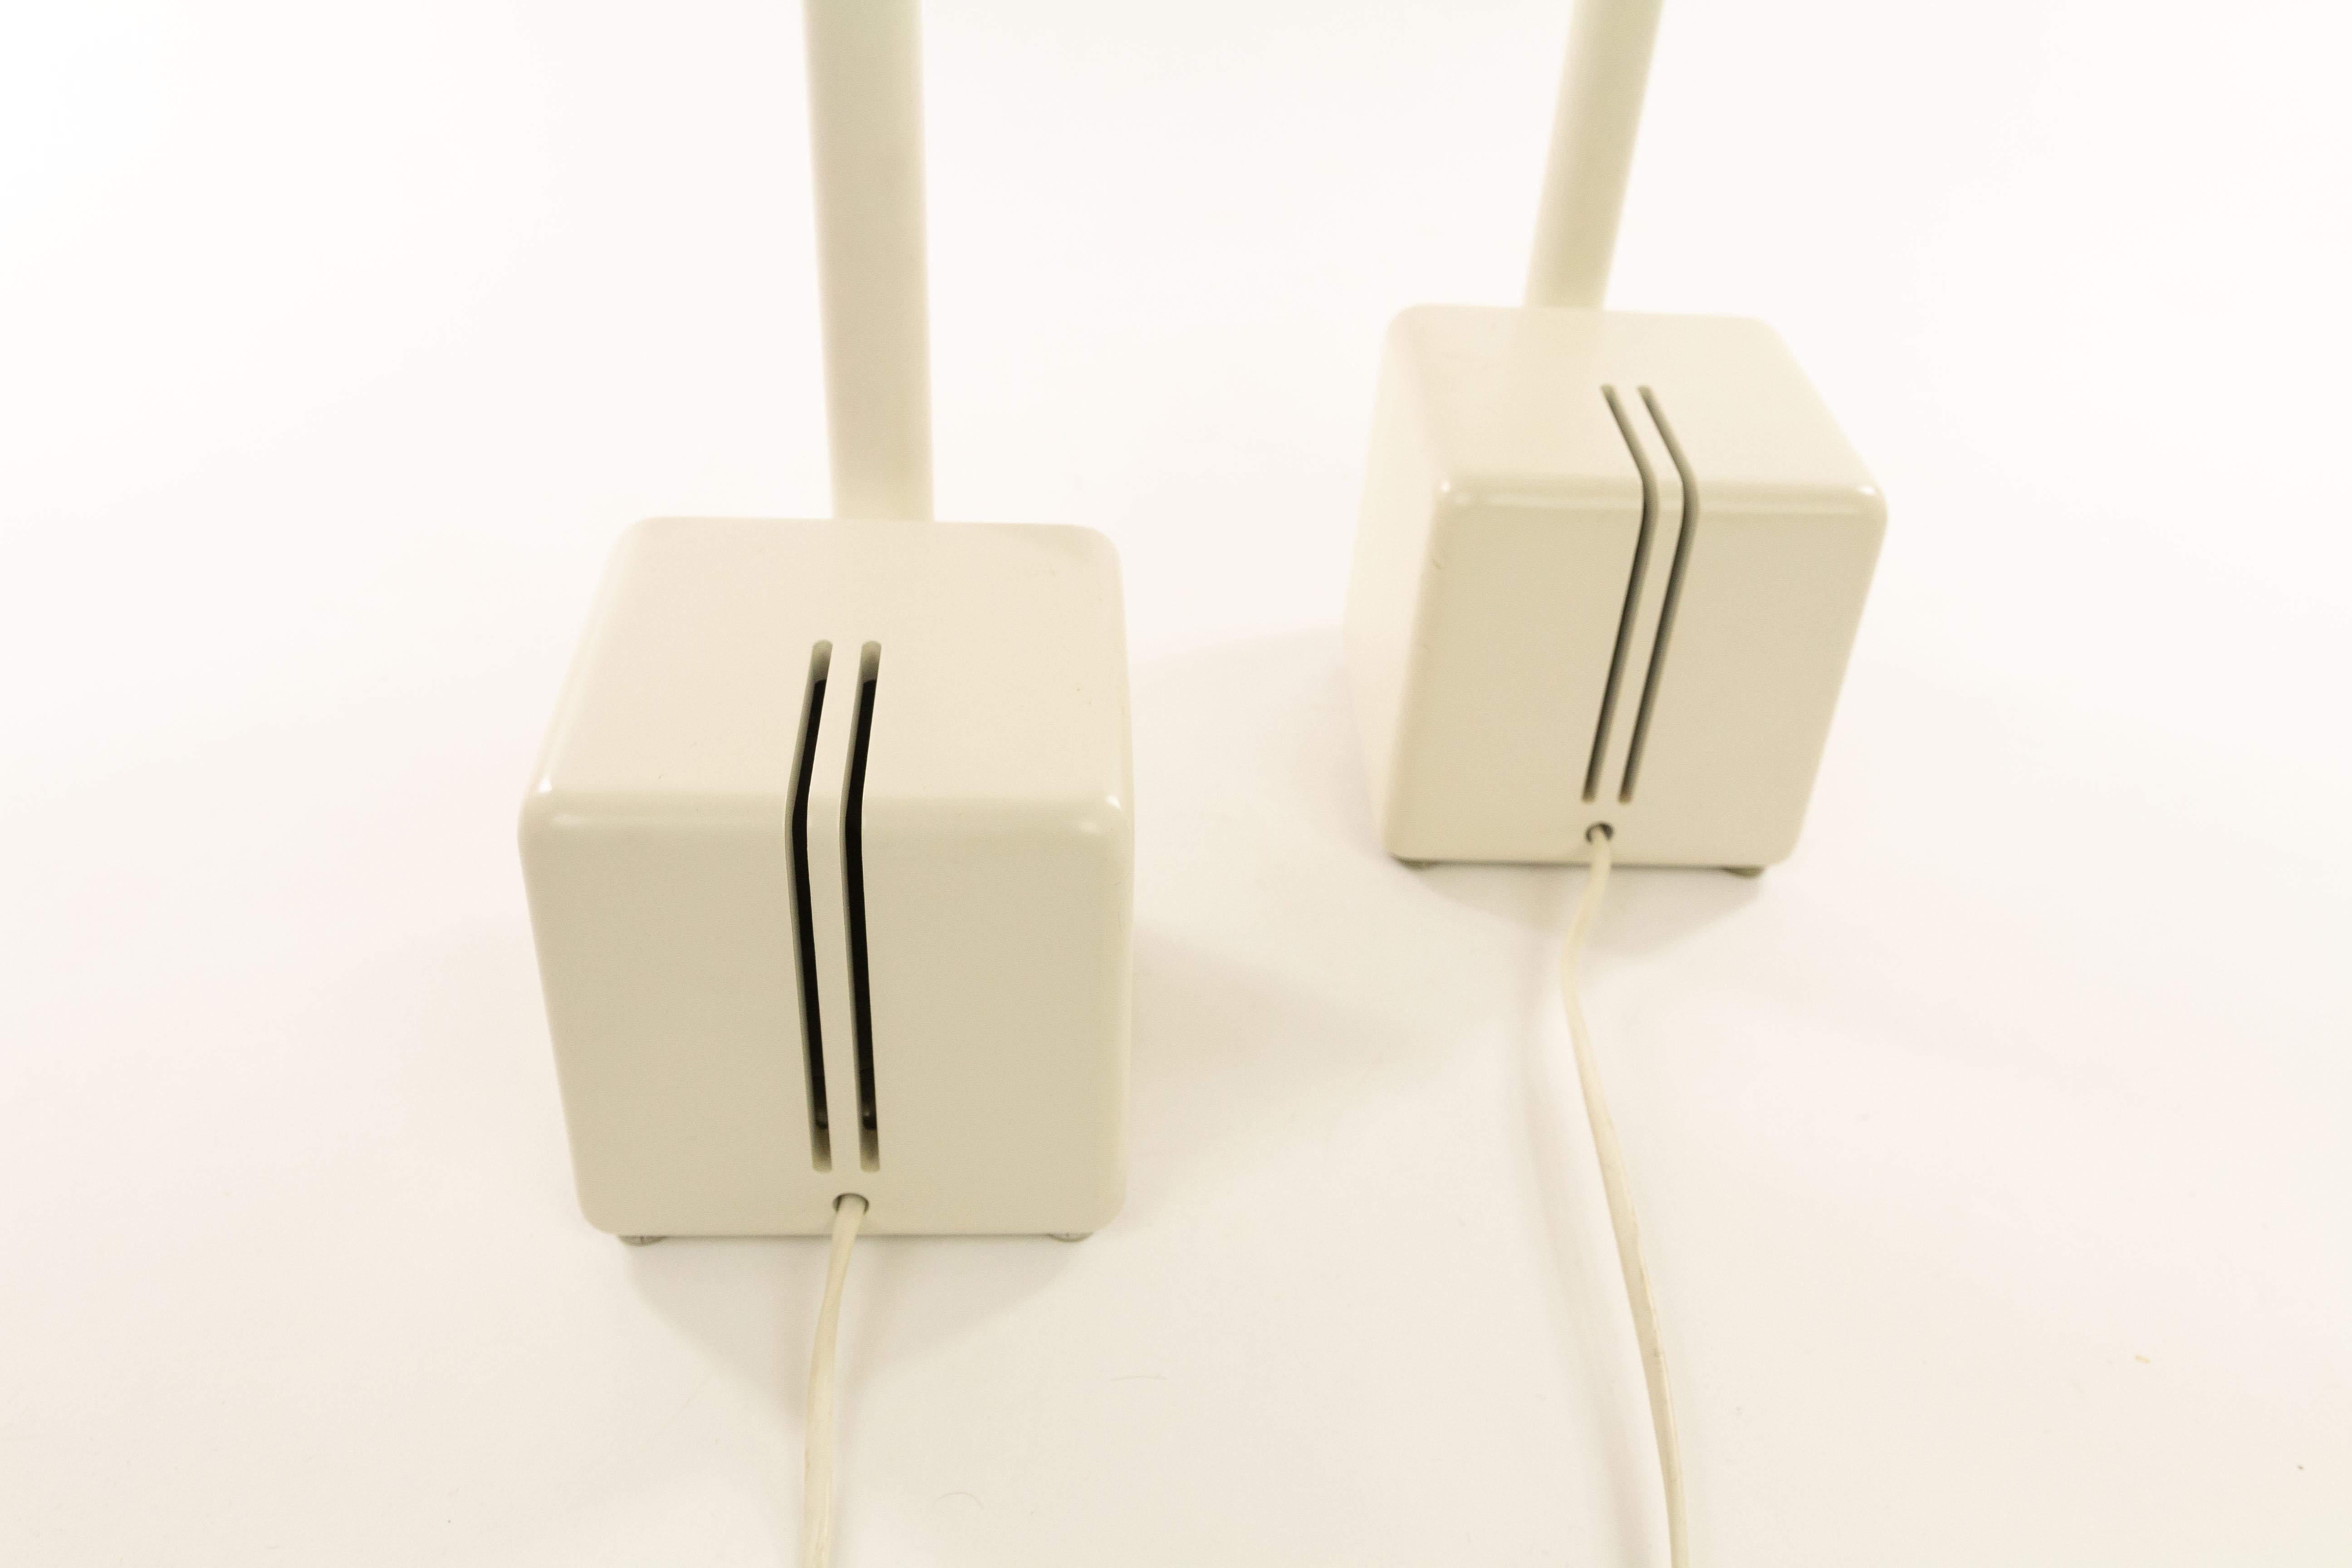 Lacquered Pair of Table Lamps by Claus Bonderup & Torsten Thorup for Focus, Denmark, 1970 For Sale